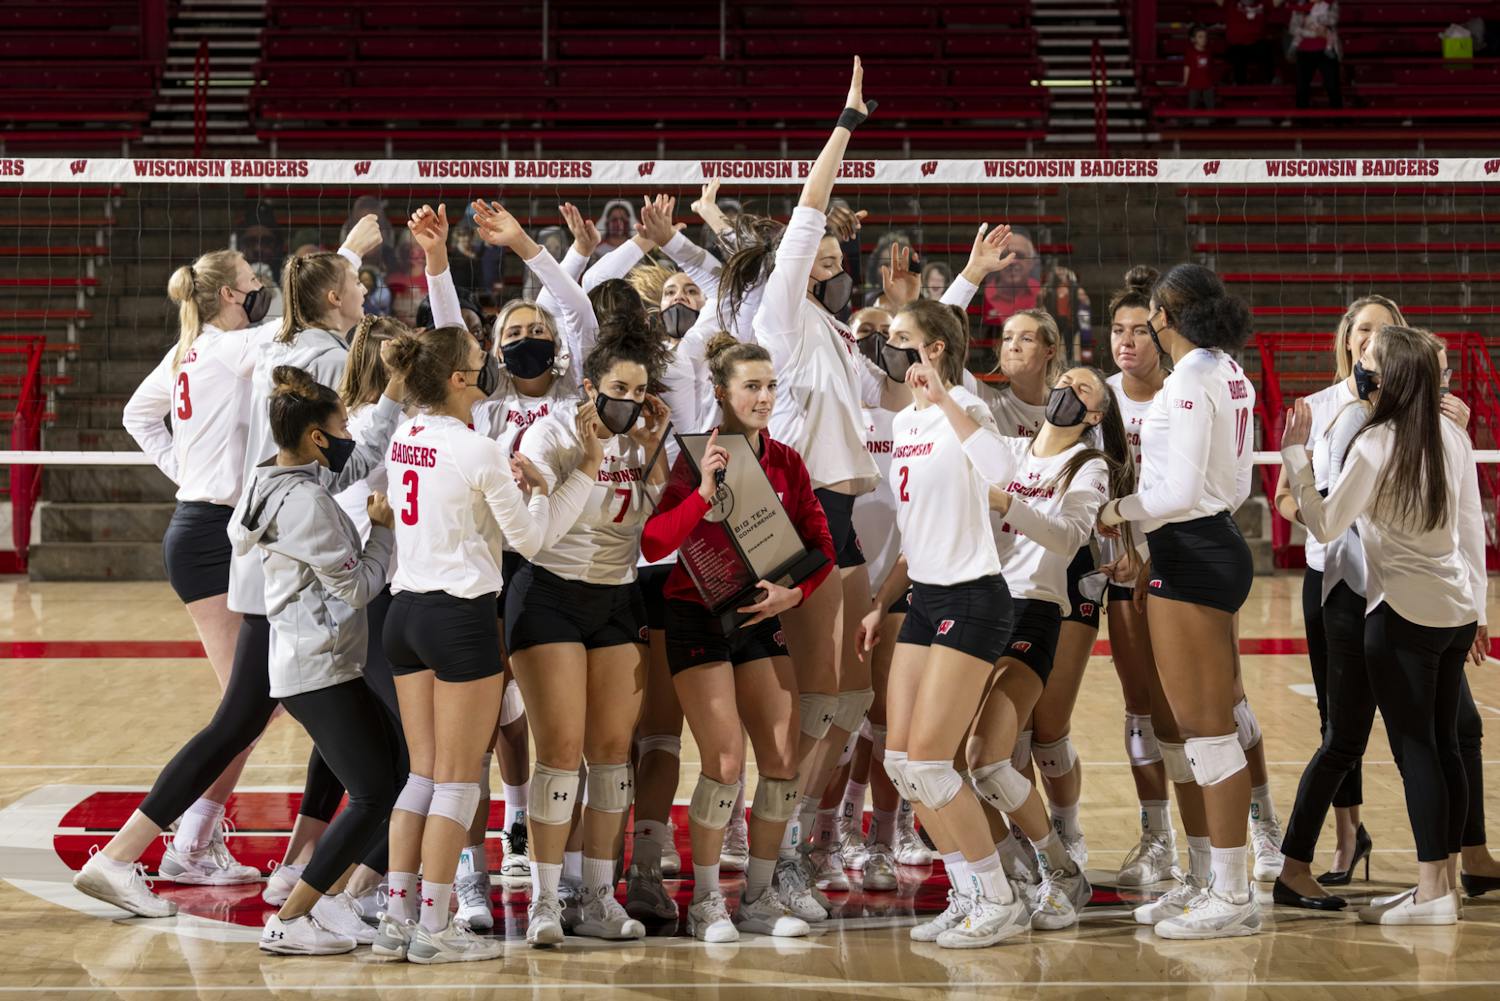 Photo of the Badger volleyball team celebrating their Big 10 championship.